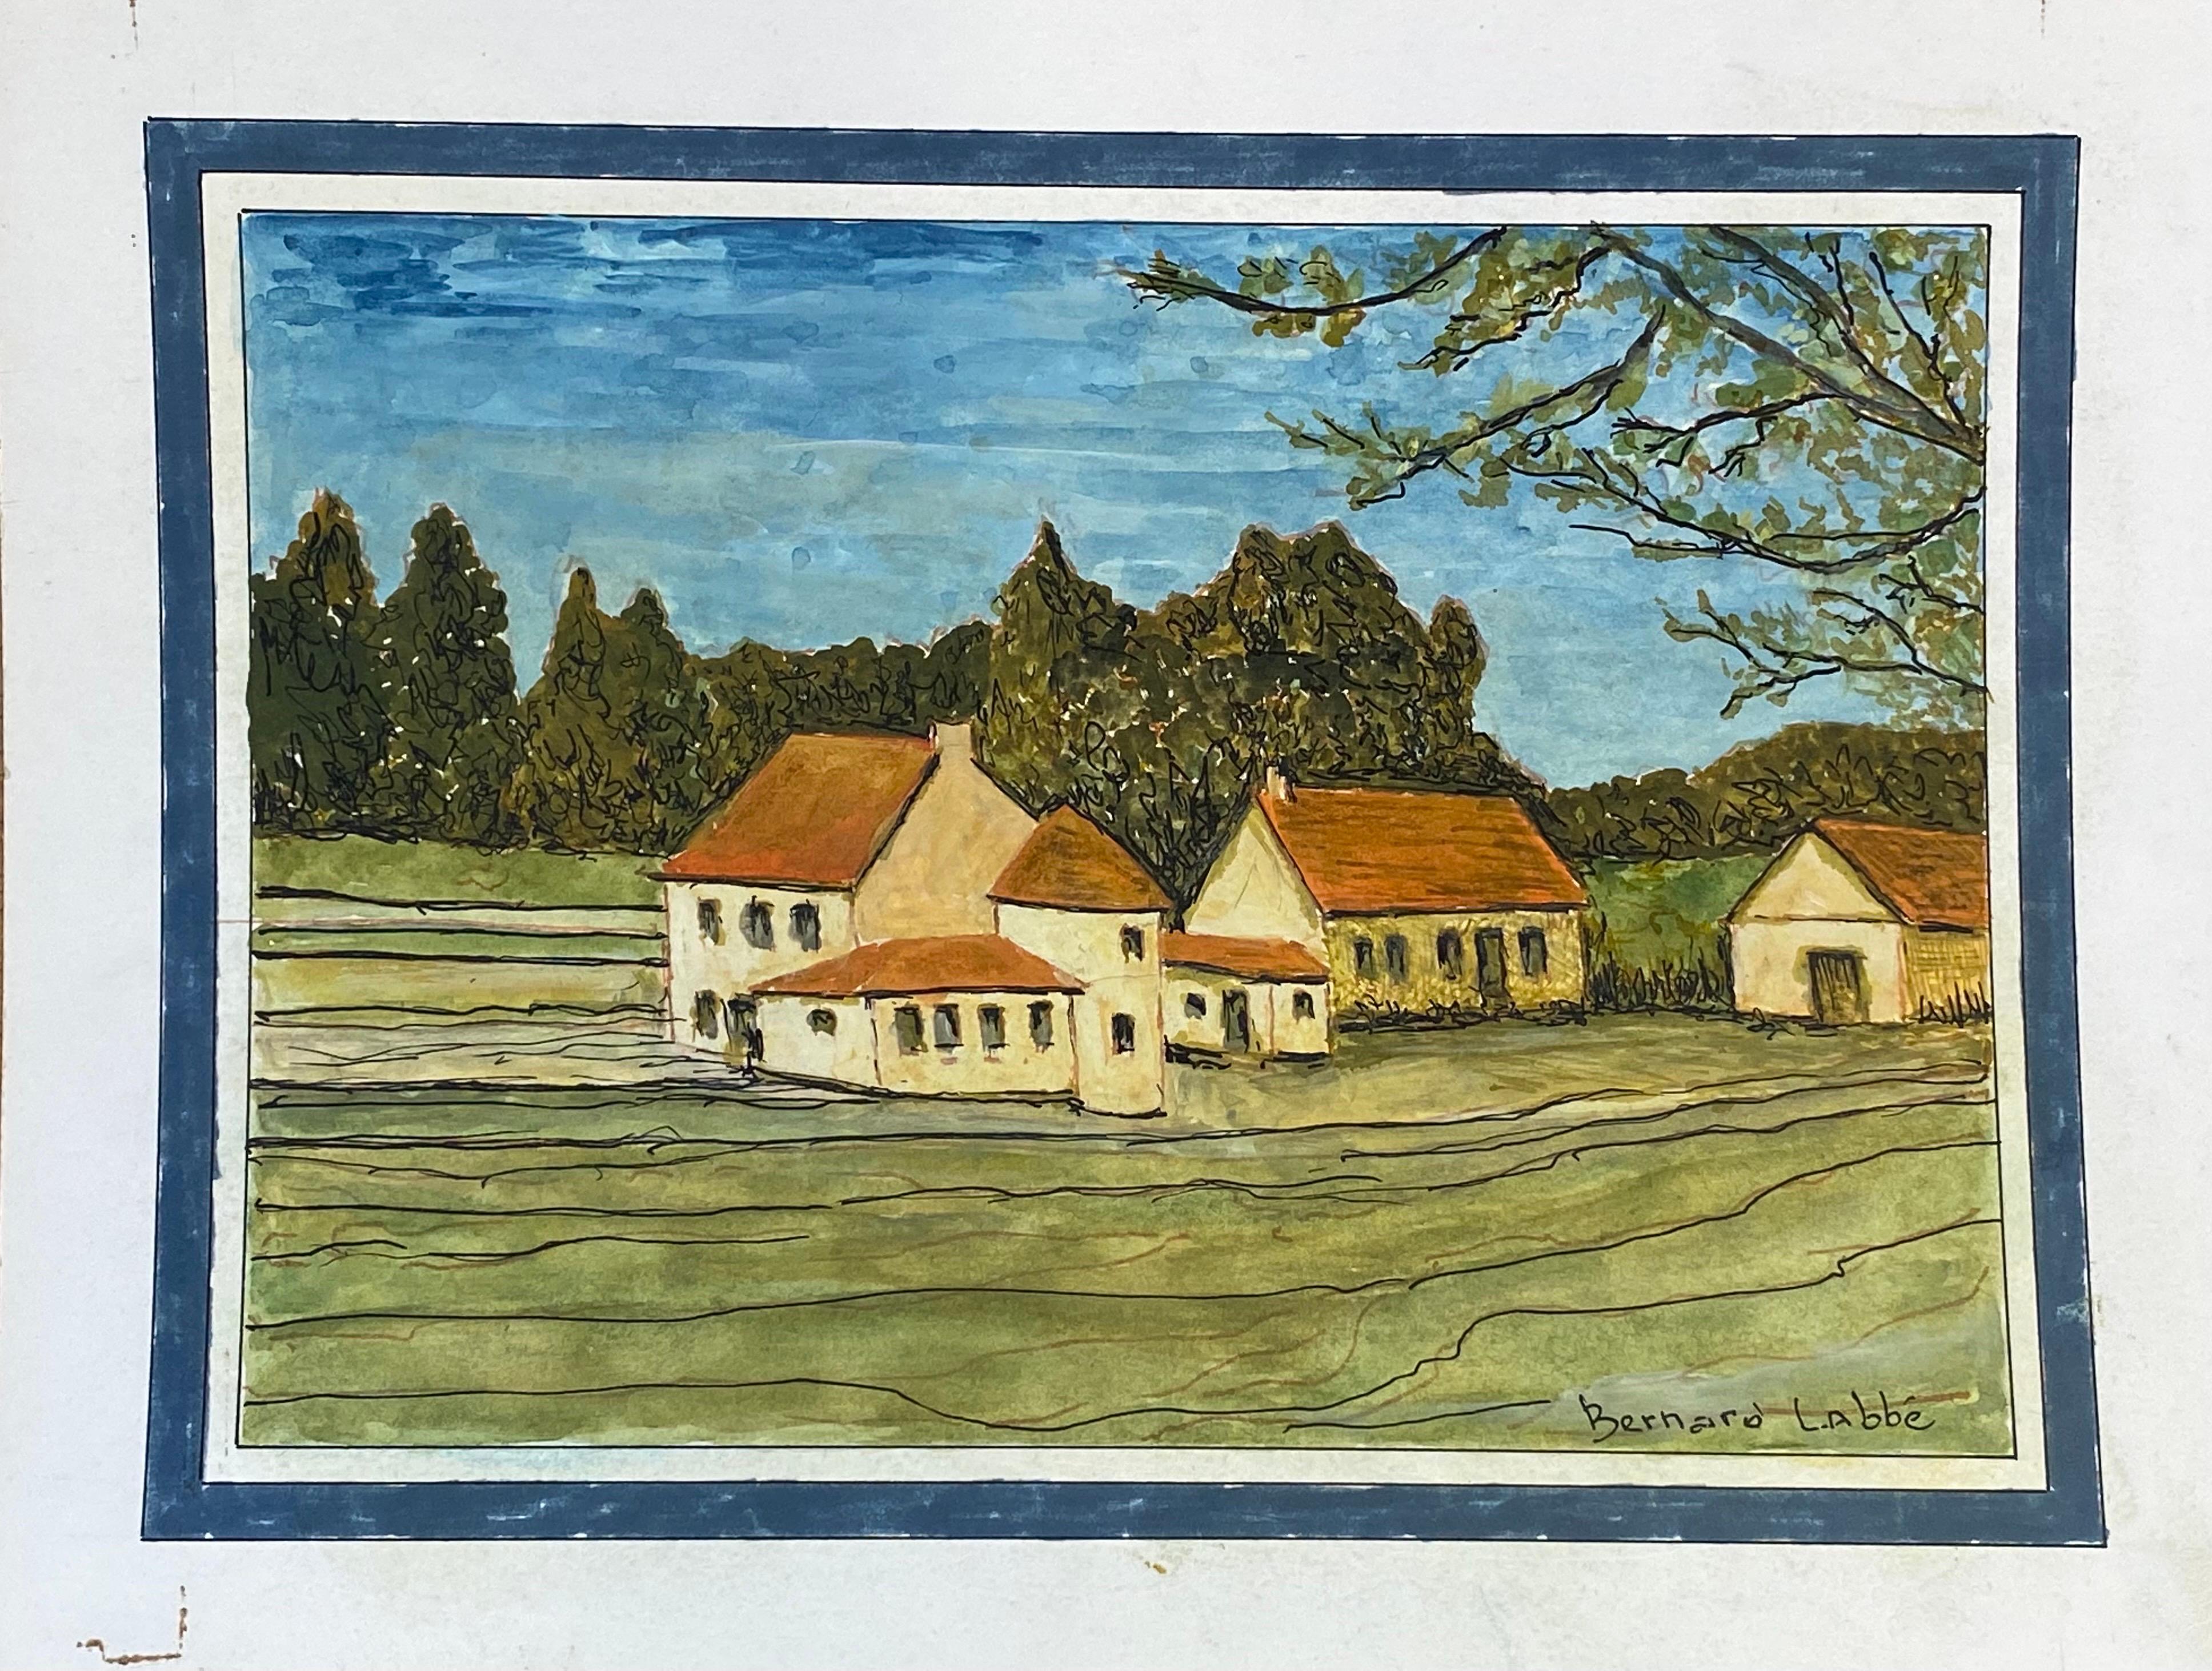 French Landscape
by Bernard Labbe (French mid 20th century)
signed original watercolour/ gouache painting on thin board, unframed
size: 9.75 x 13 inches
condition: very good and ready to be enjoyed. 

provenance: the artists atelier/ studio,